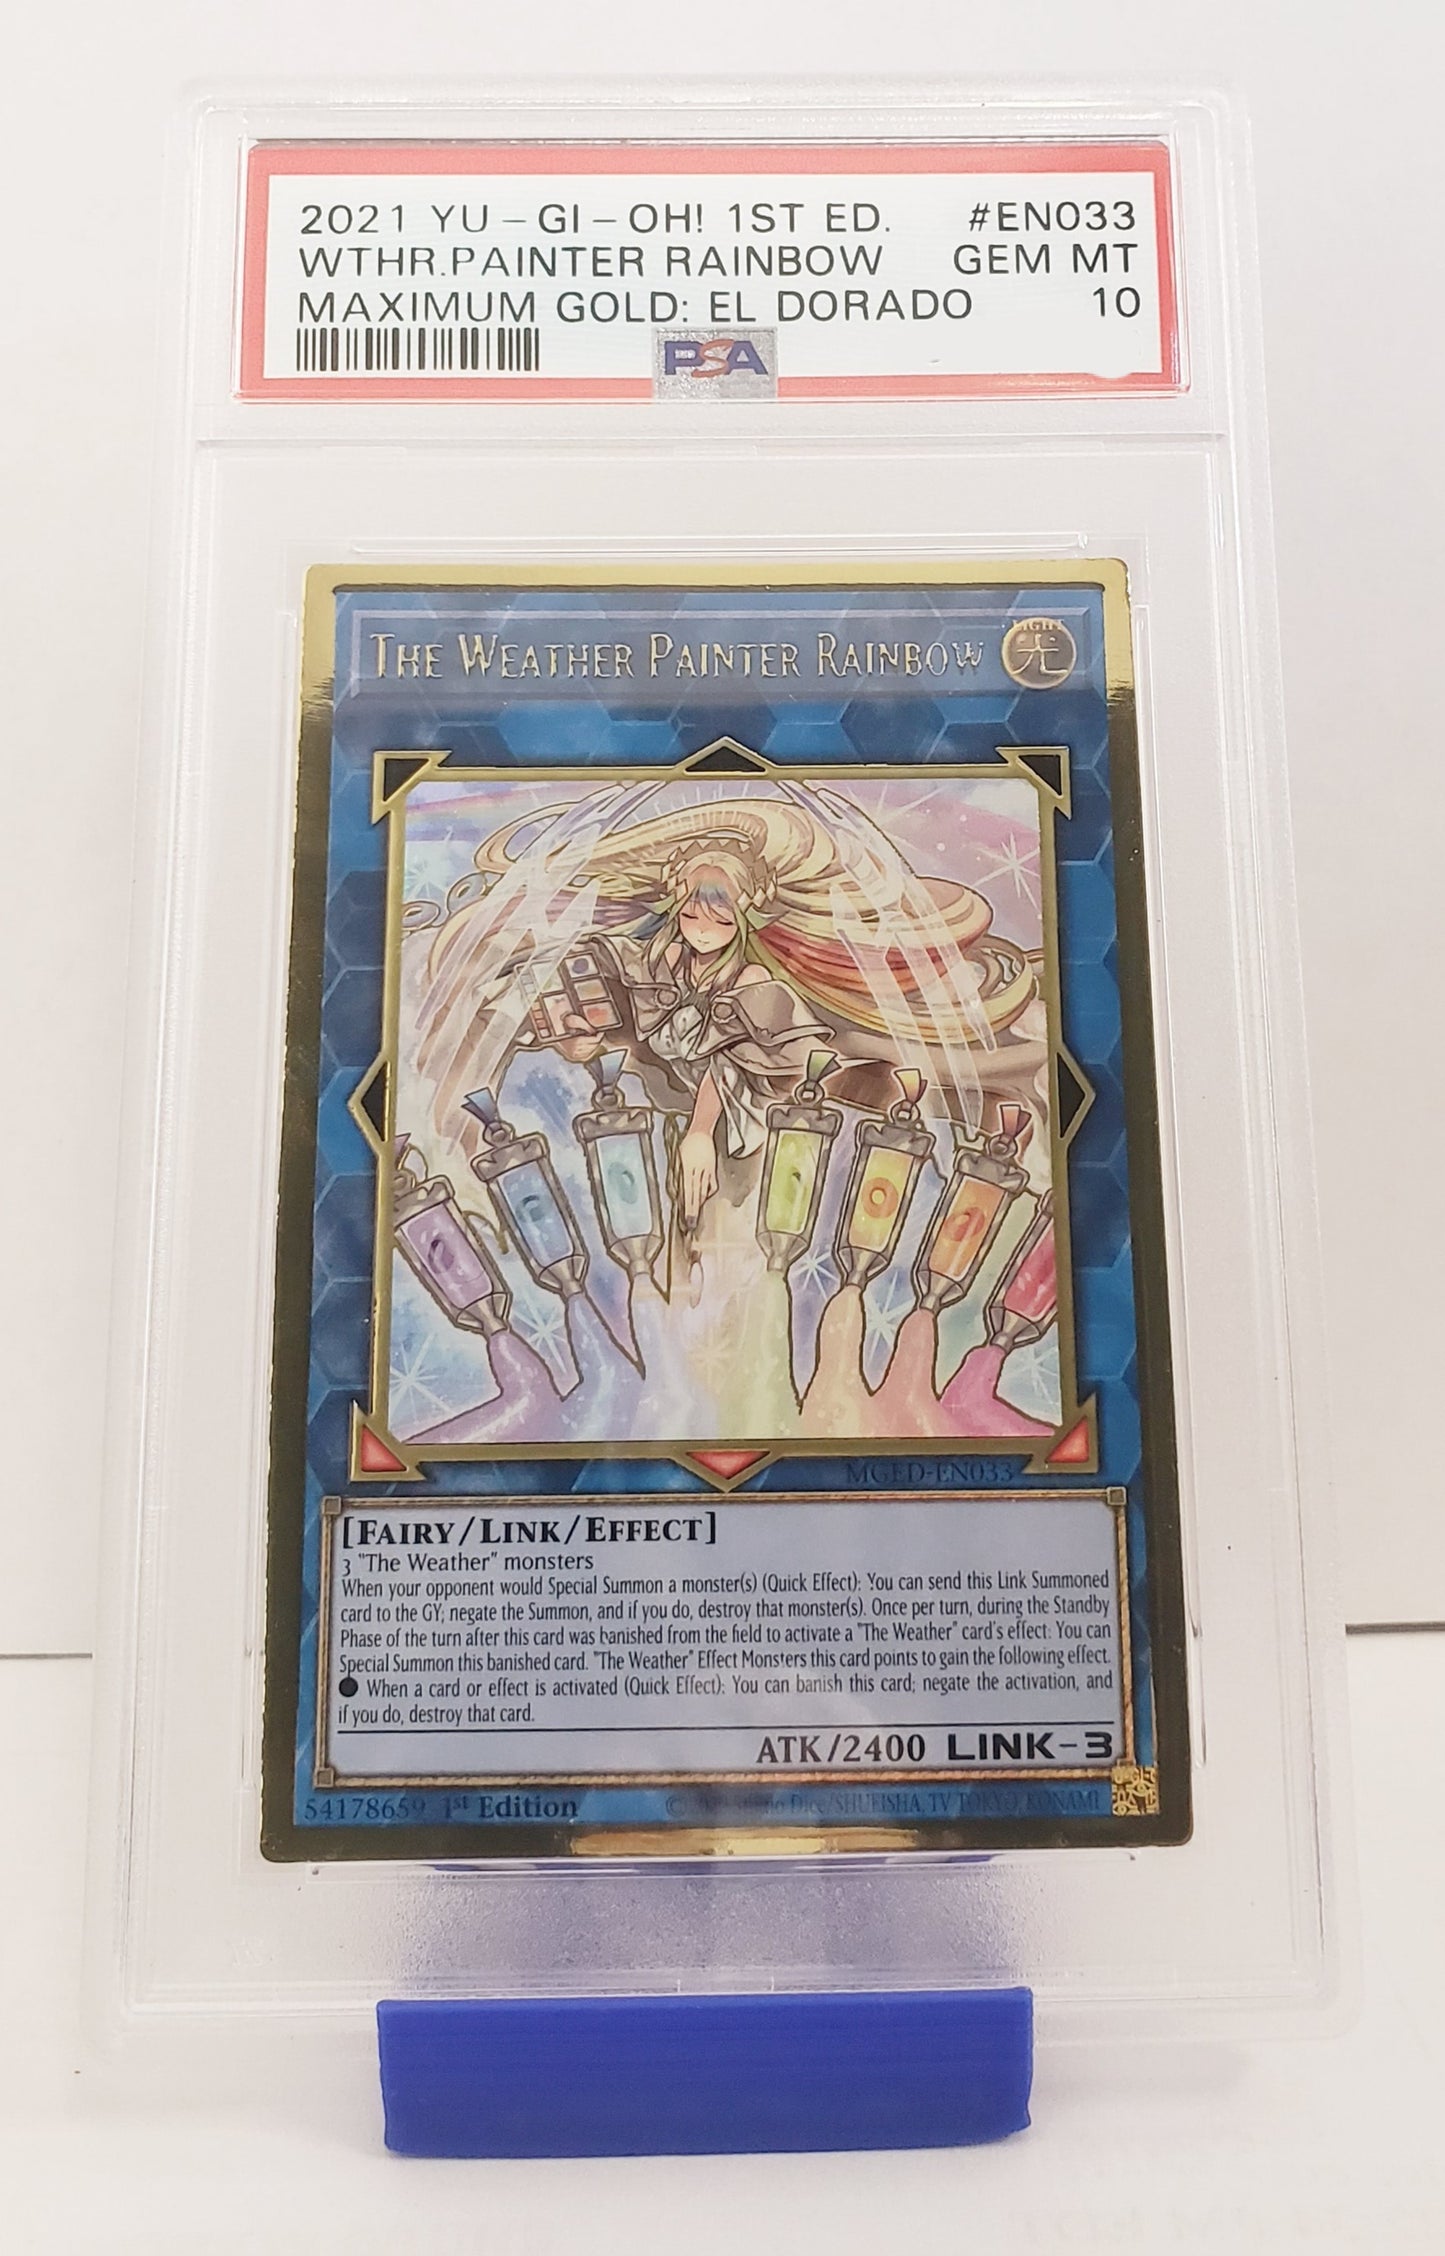 The Weather Painter Rainbow (MGED-EN033) PSA 10 1st Ed.